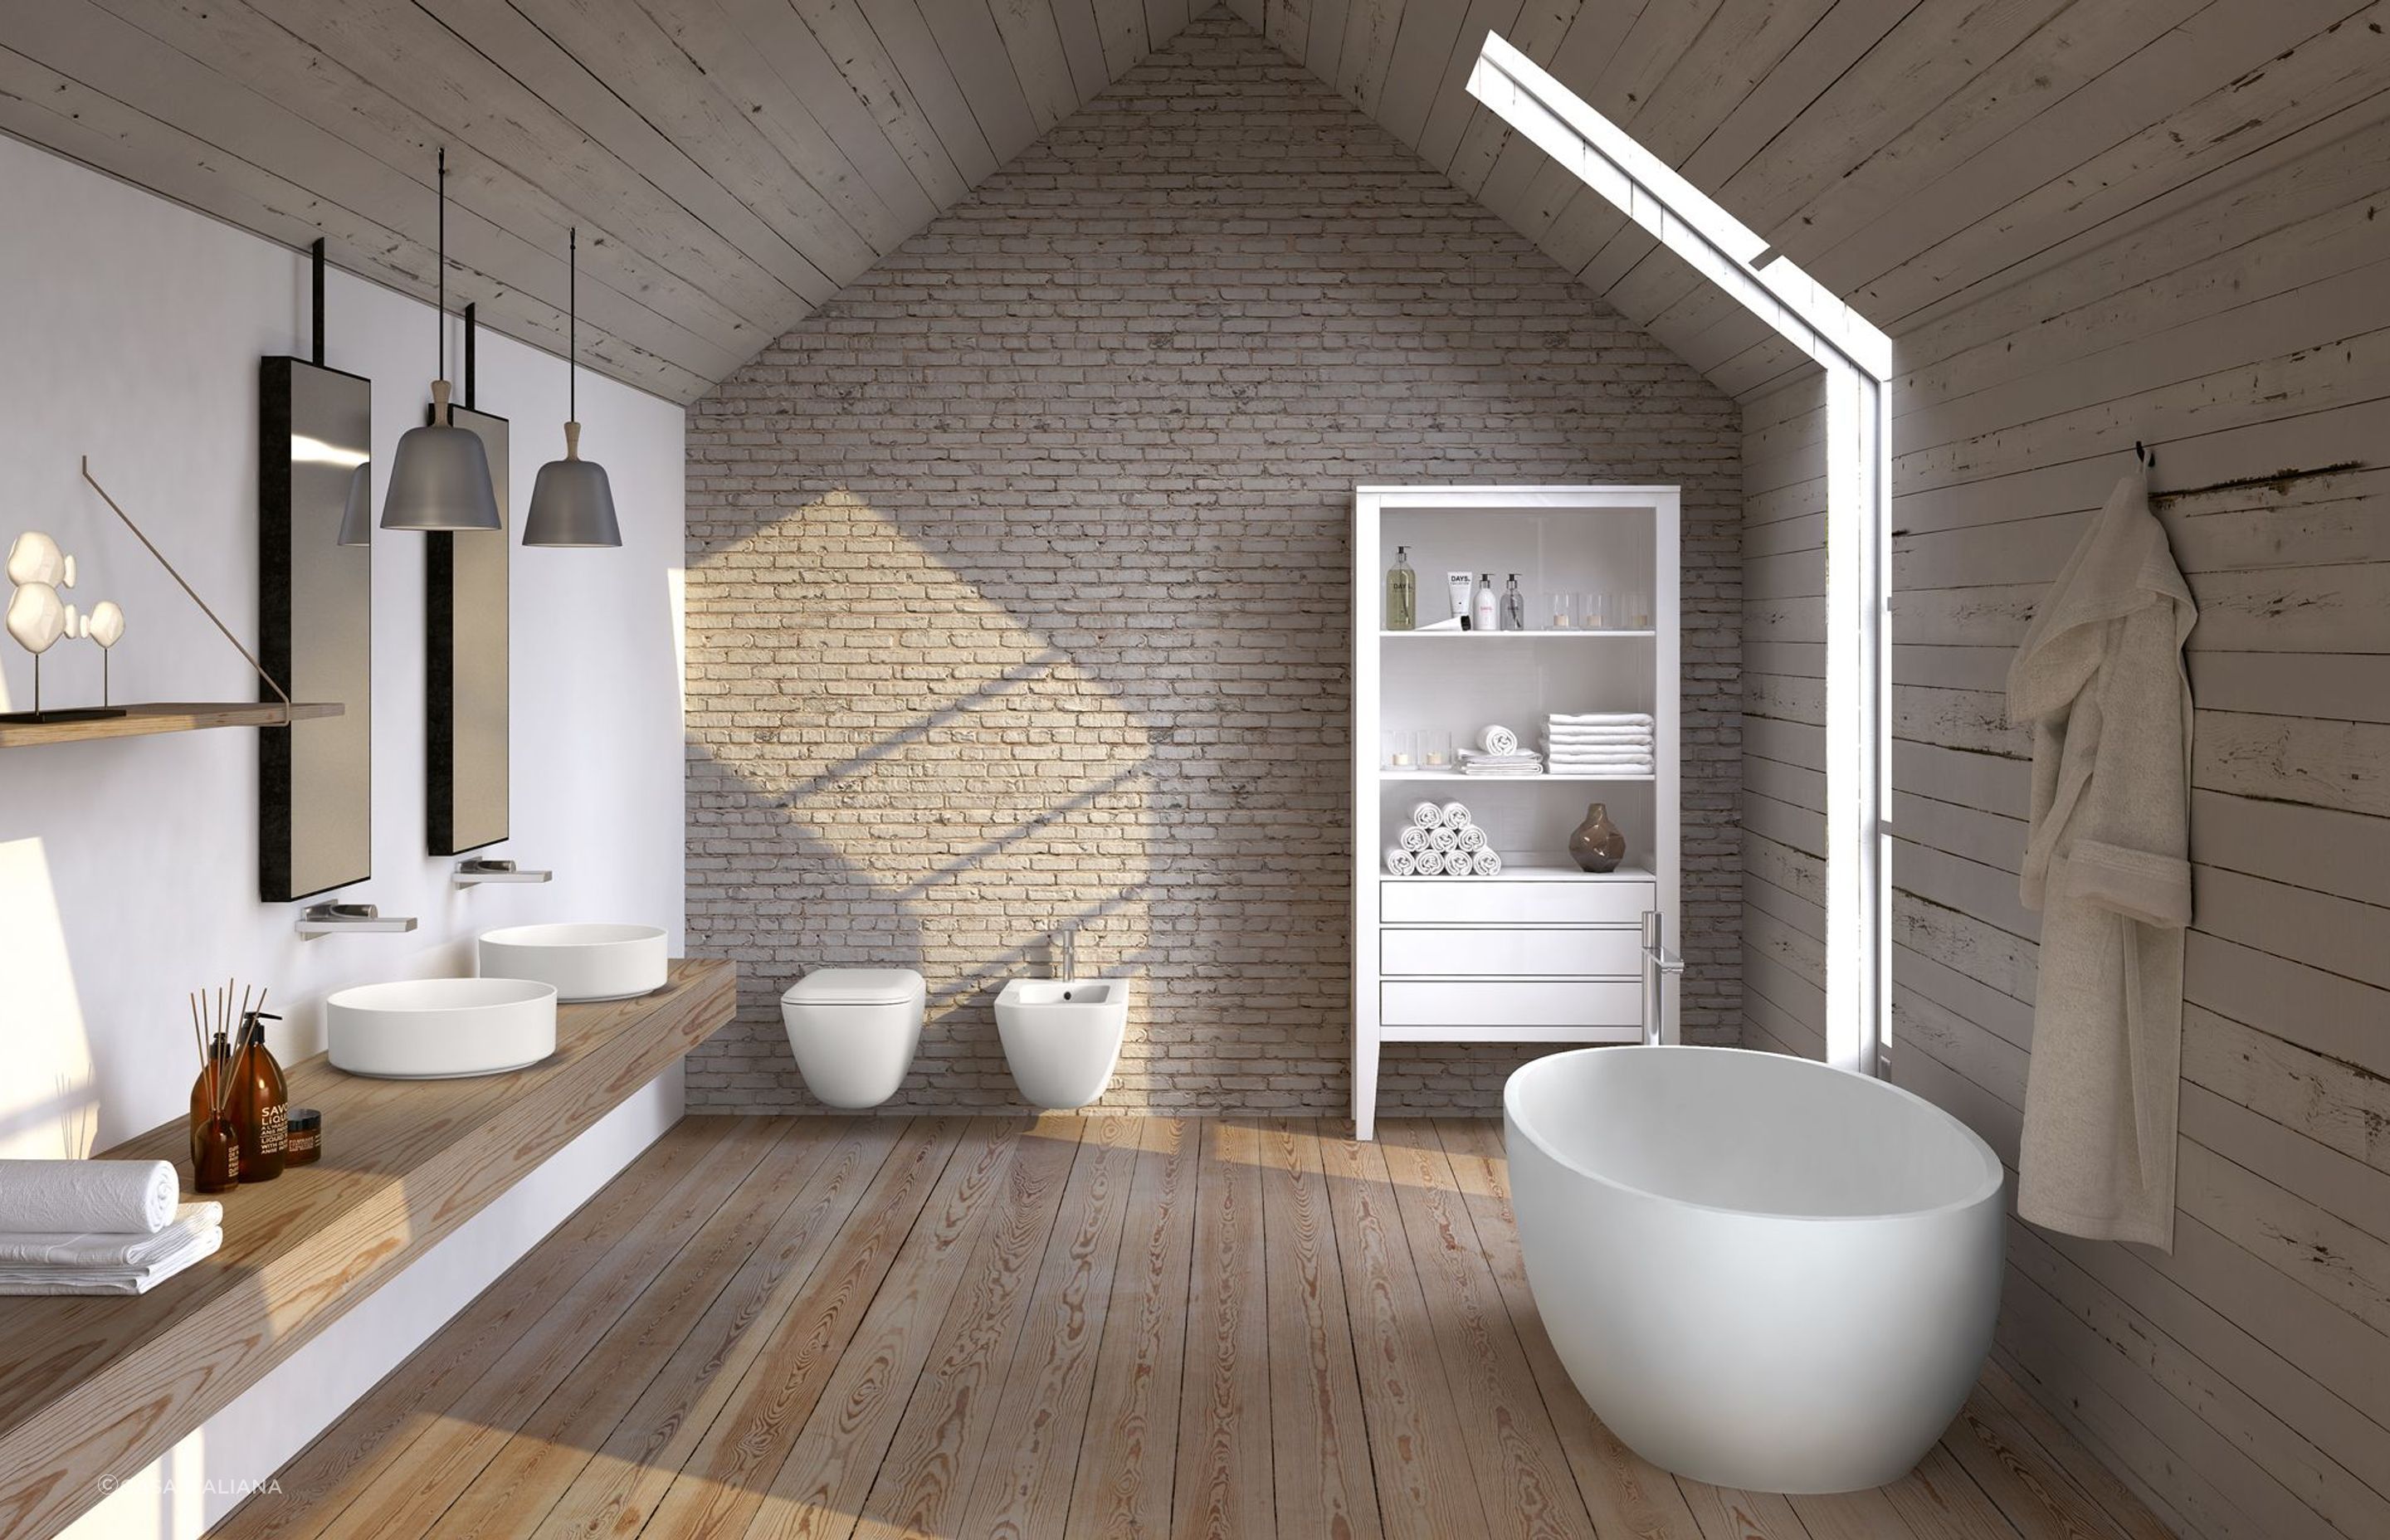 The sleek and modern Shui Comfort Wall Hung Toilet and Bidet by cielo